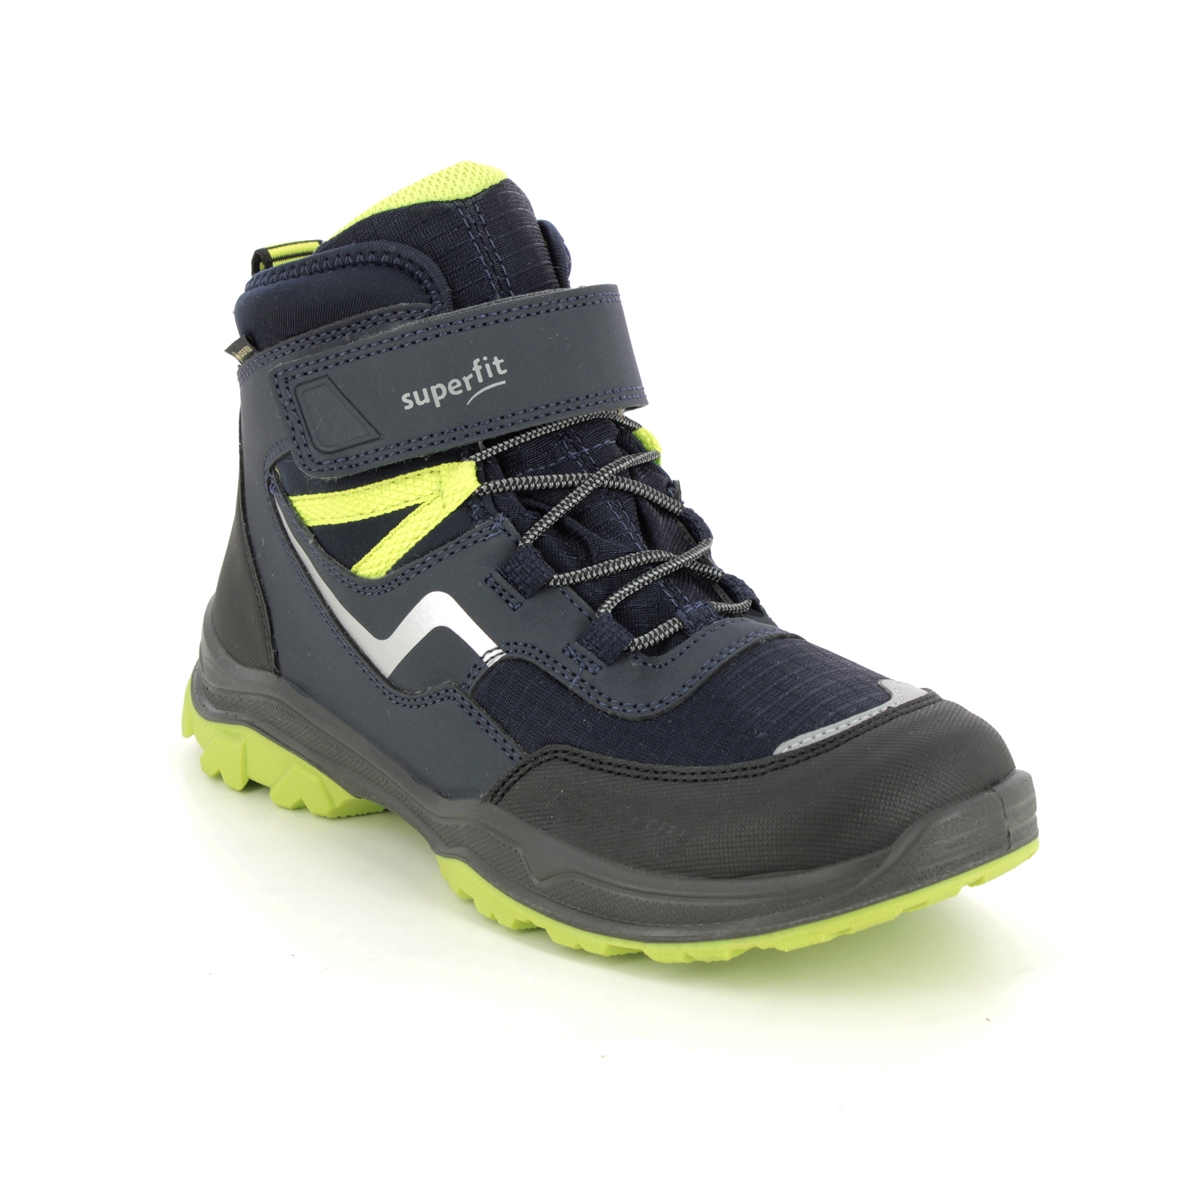 Superfit Jupiter Bungee Gtx Navy Lime Kids Boys Boots 1000074-8000 In Size 40 In Plain Navy Lime For kids